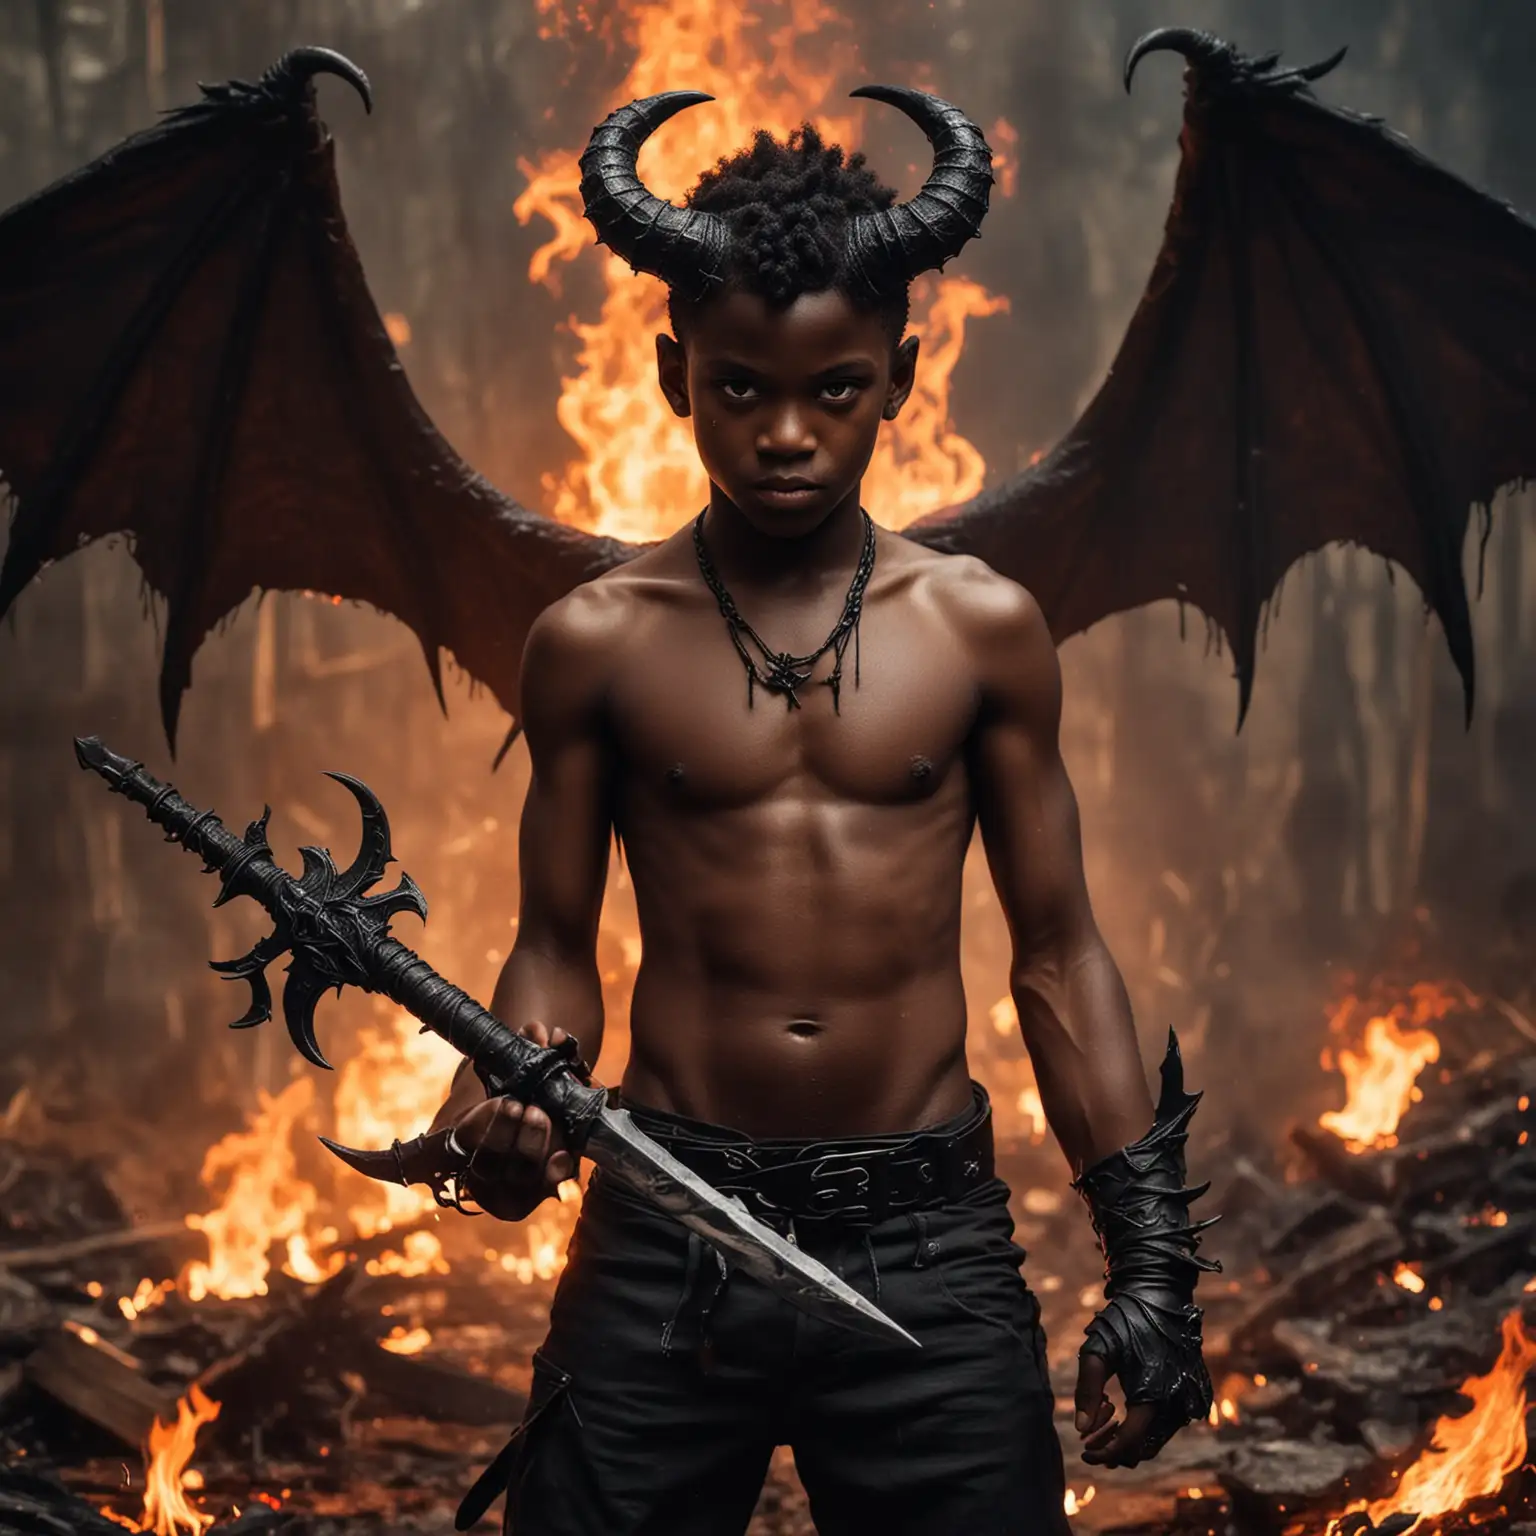 evil shirtless black boy with large horns with black devil wings holding a sword in his hand and surrounded by a lot of fire